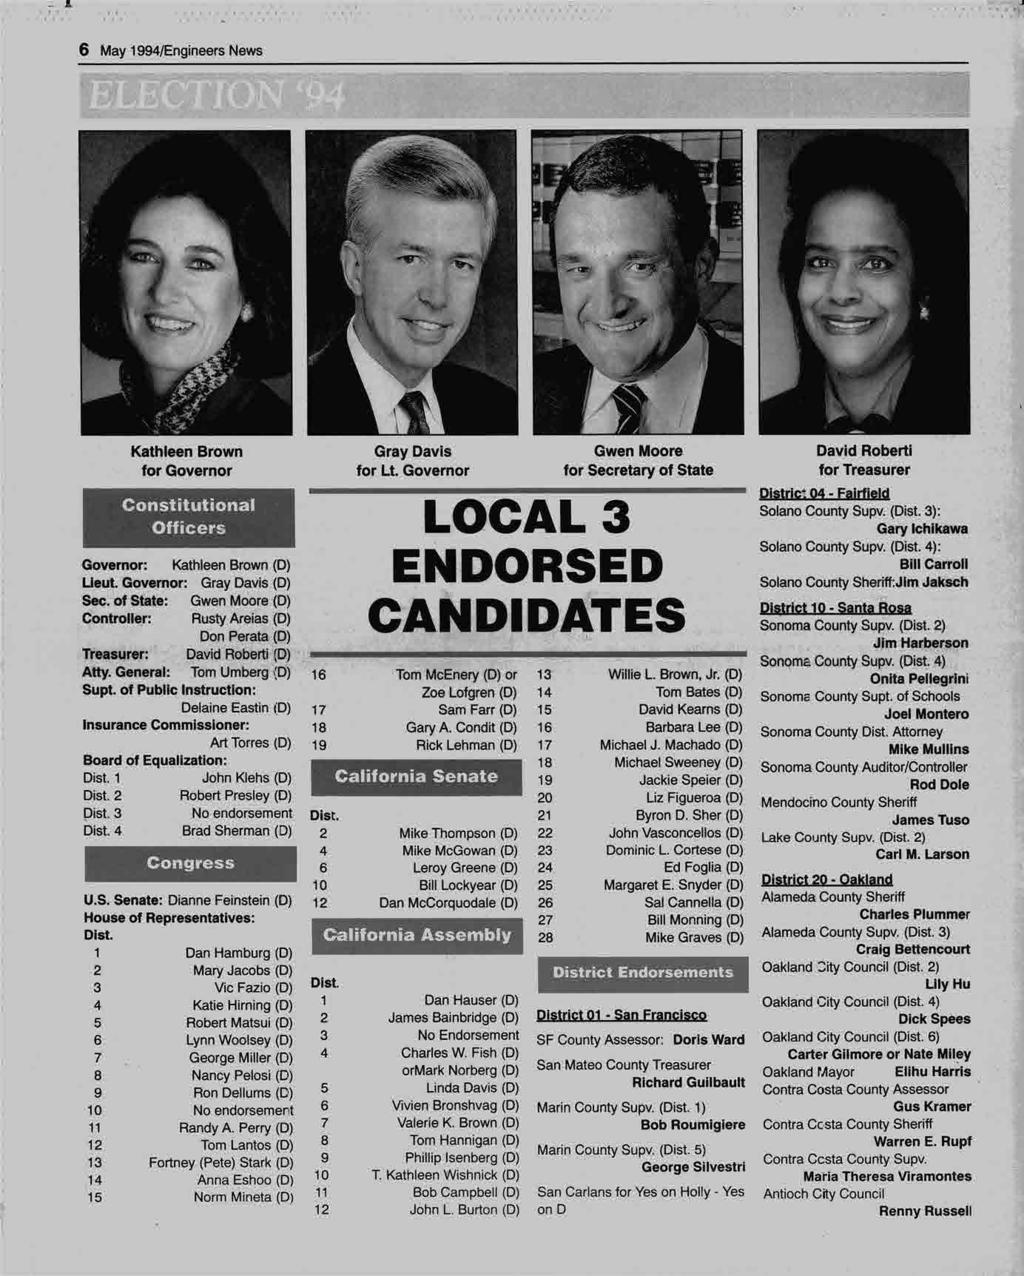 1 6 May 1994/Engineers News, 11 -IT 4 1 1 Kathleen Brown Gray Davis Gwen Moore David Roberti for Governor for Lt.